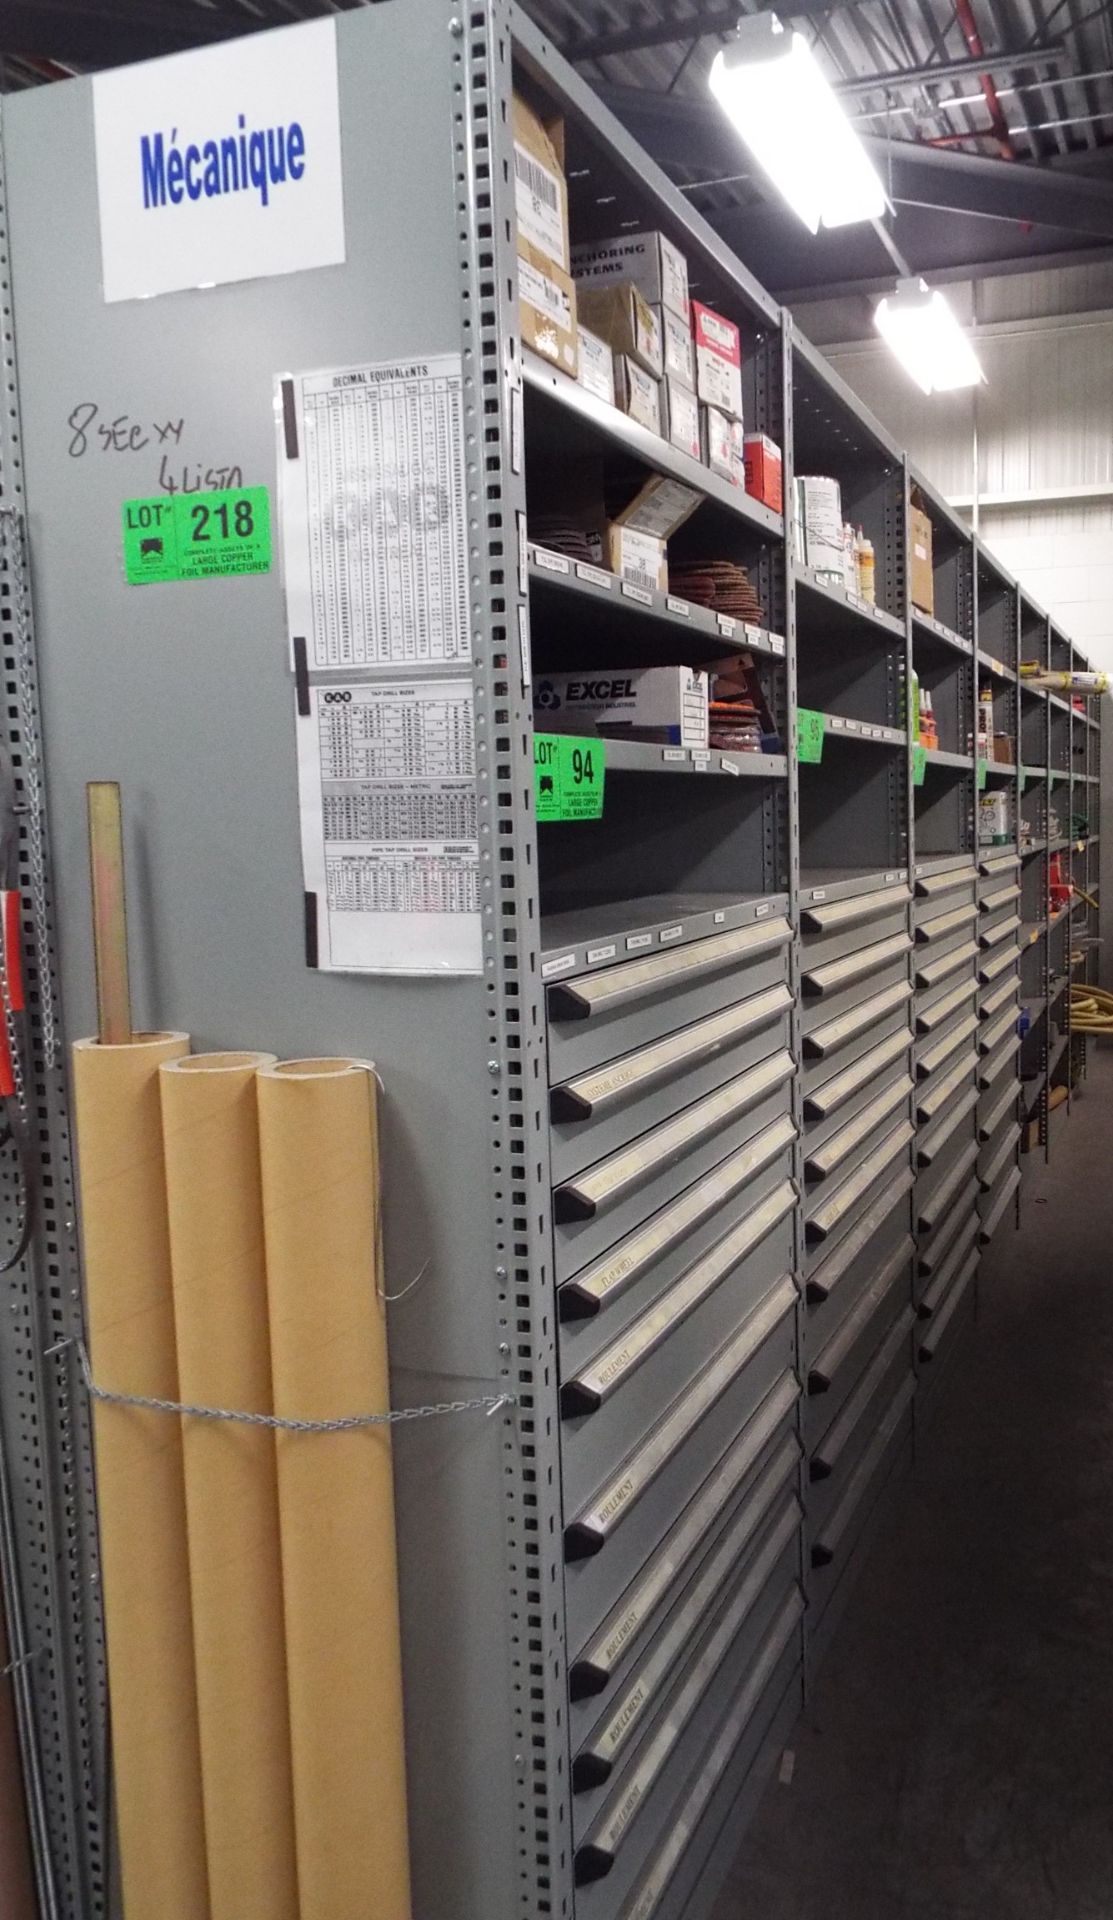 LOT/ ROUSSEAU 8 SECTION SHELVING UNIT WITH TOOL CABINETS (DELAYED DELIVERY)